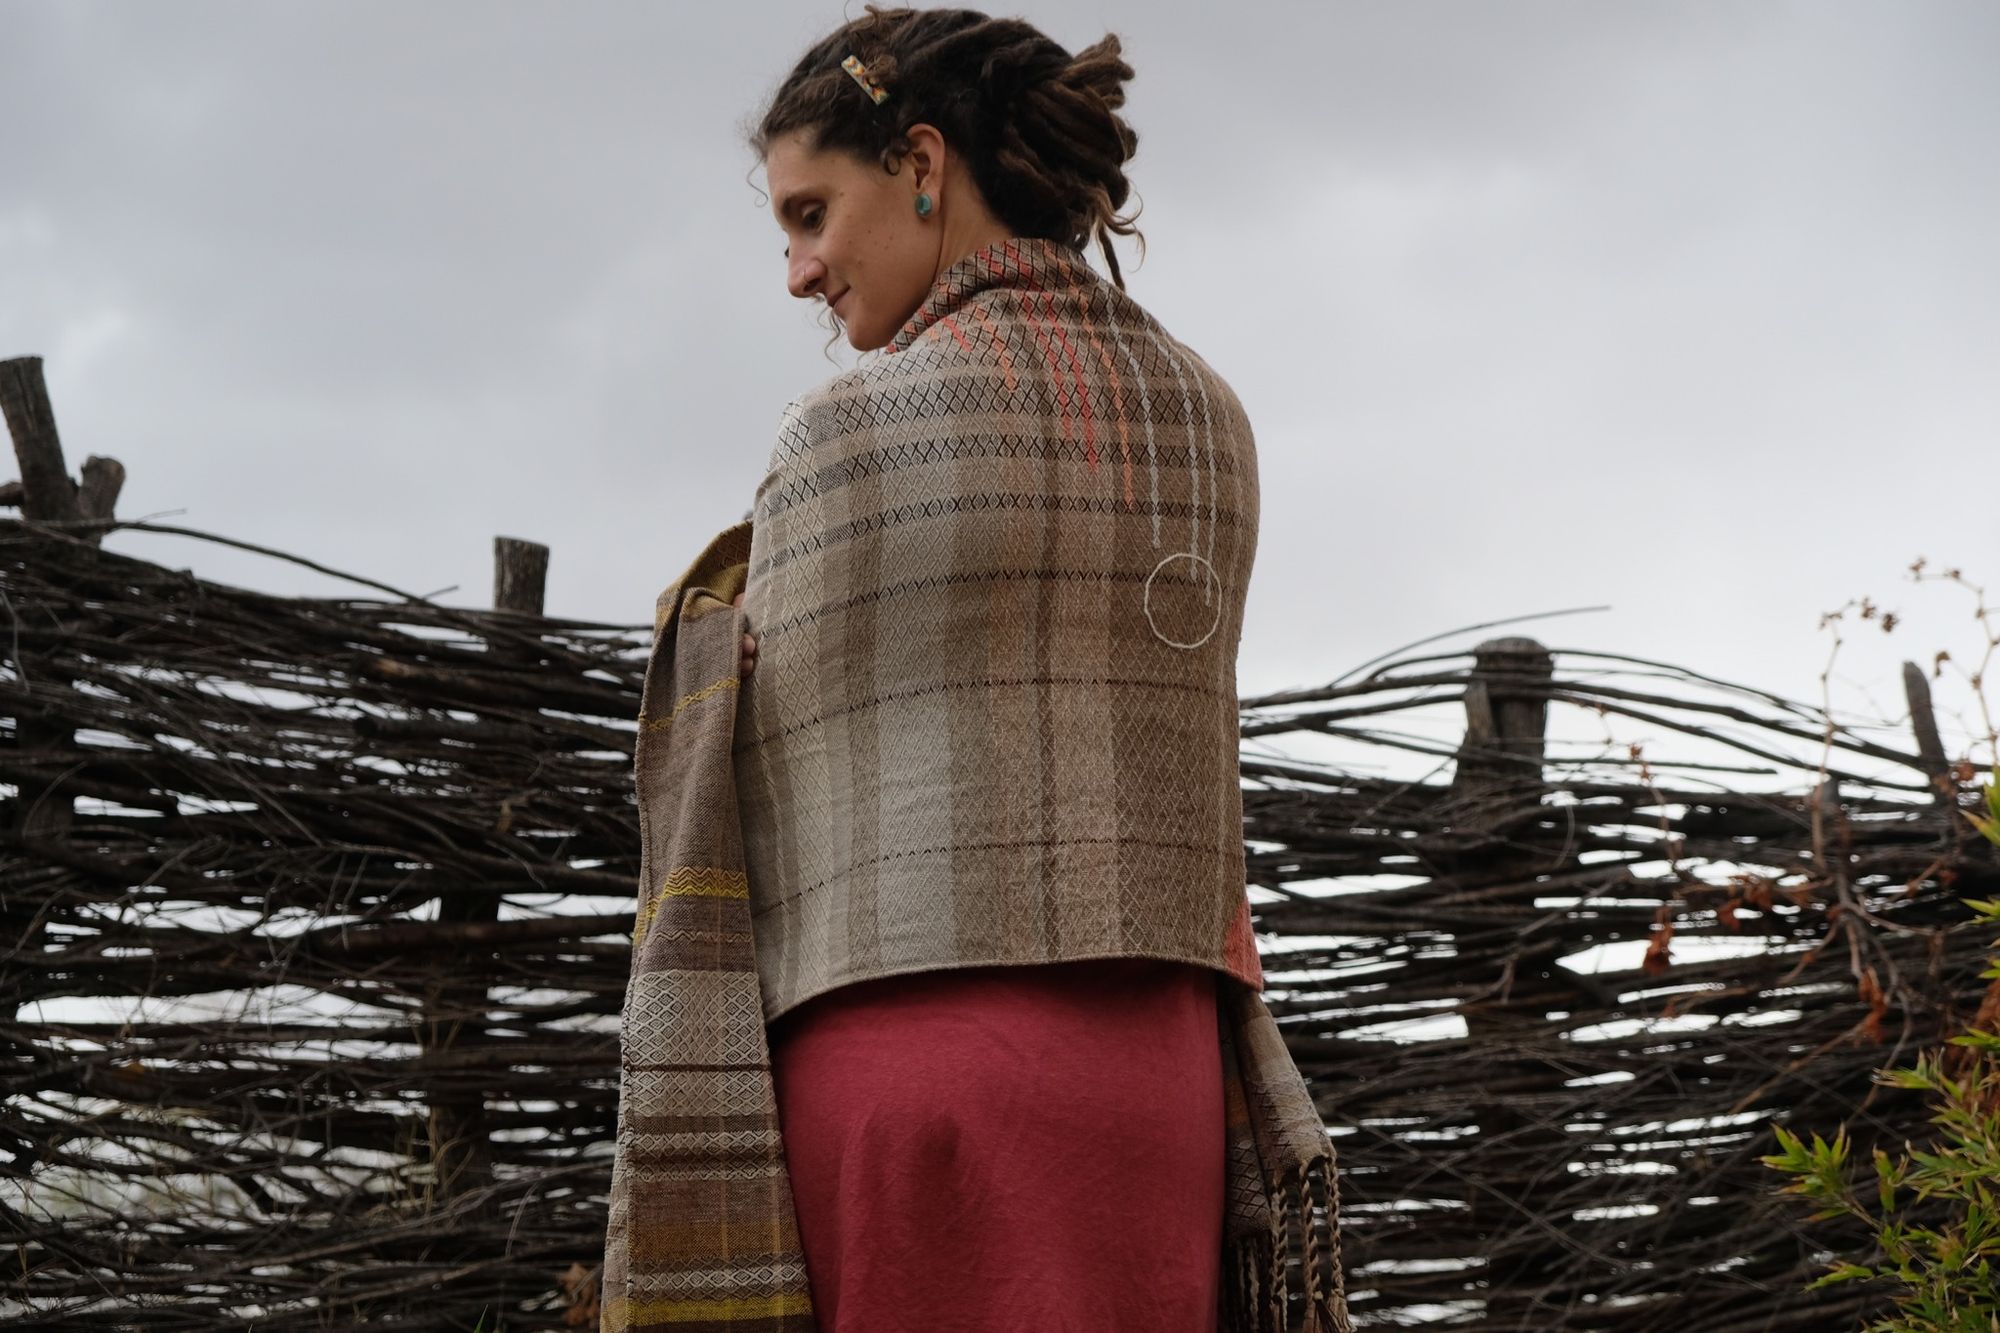 woman wearing a red-pink long-sleeved dress and a handwoven shawl against a stick fence